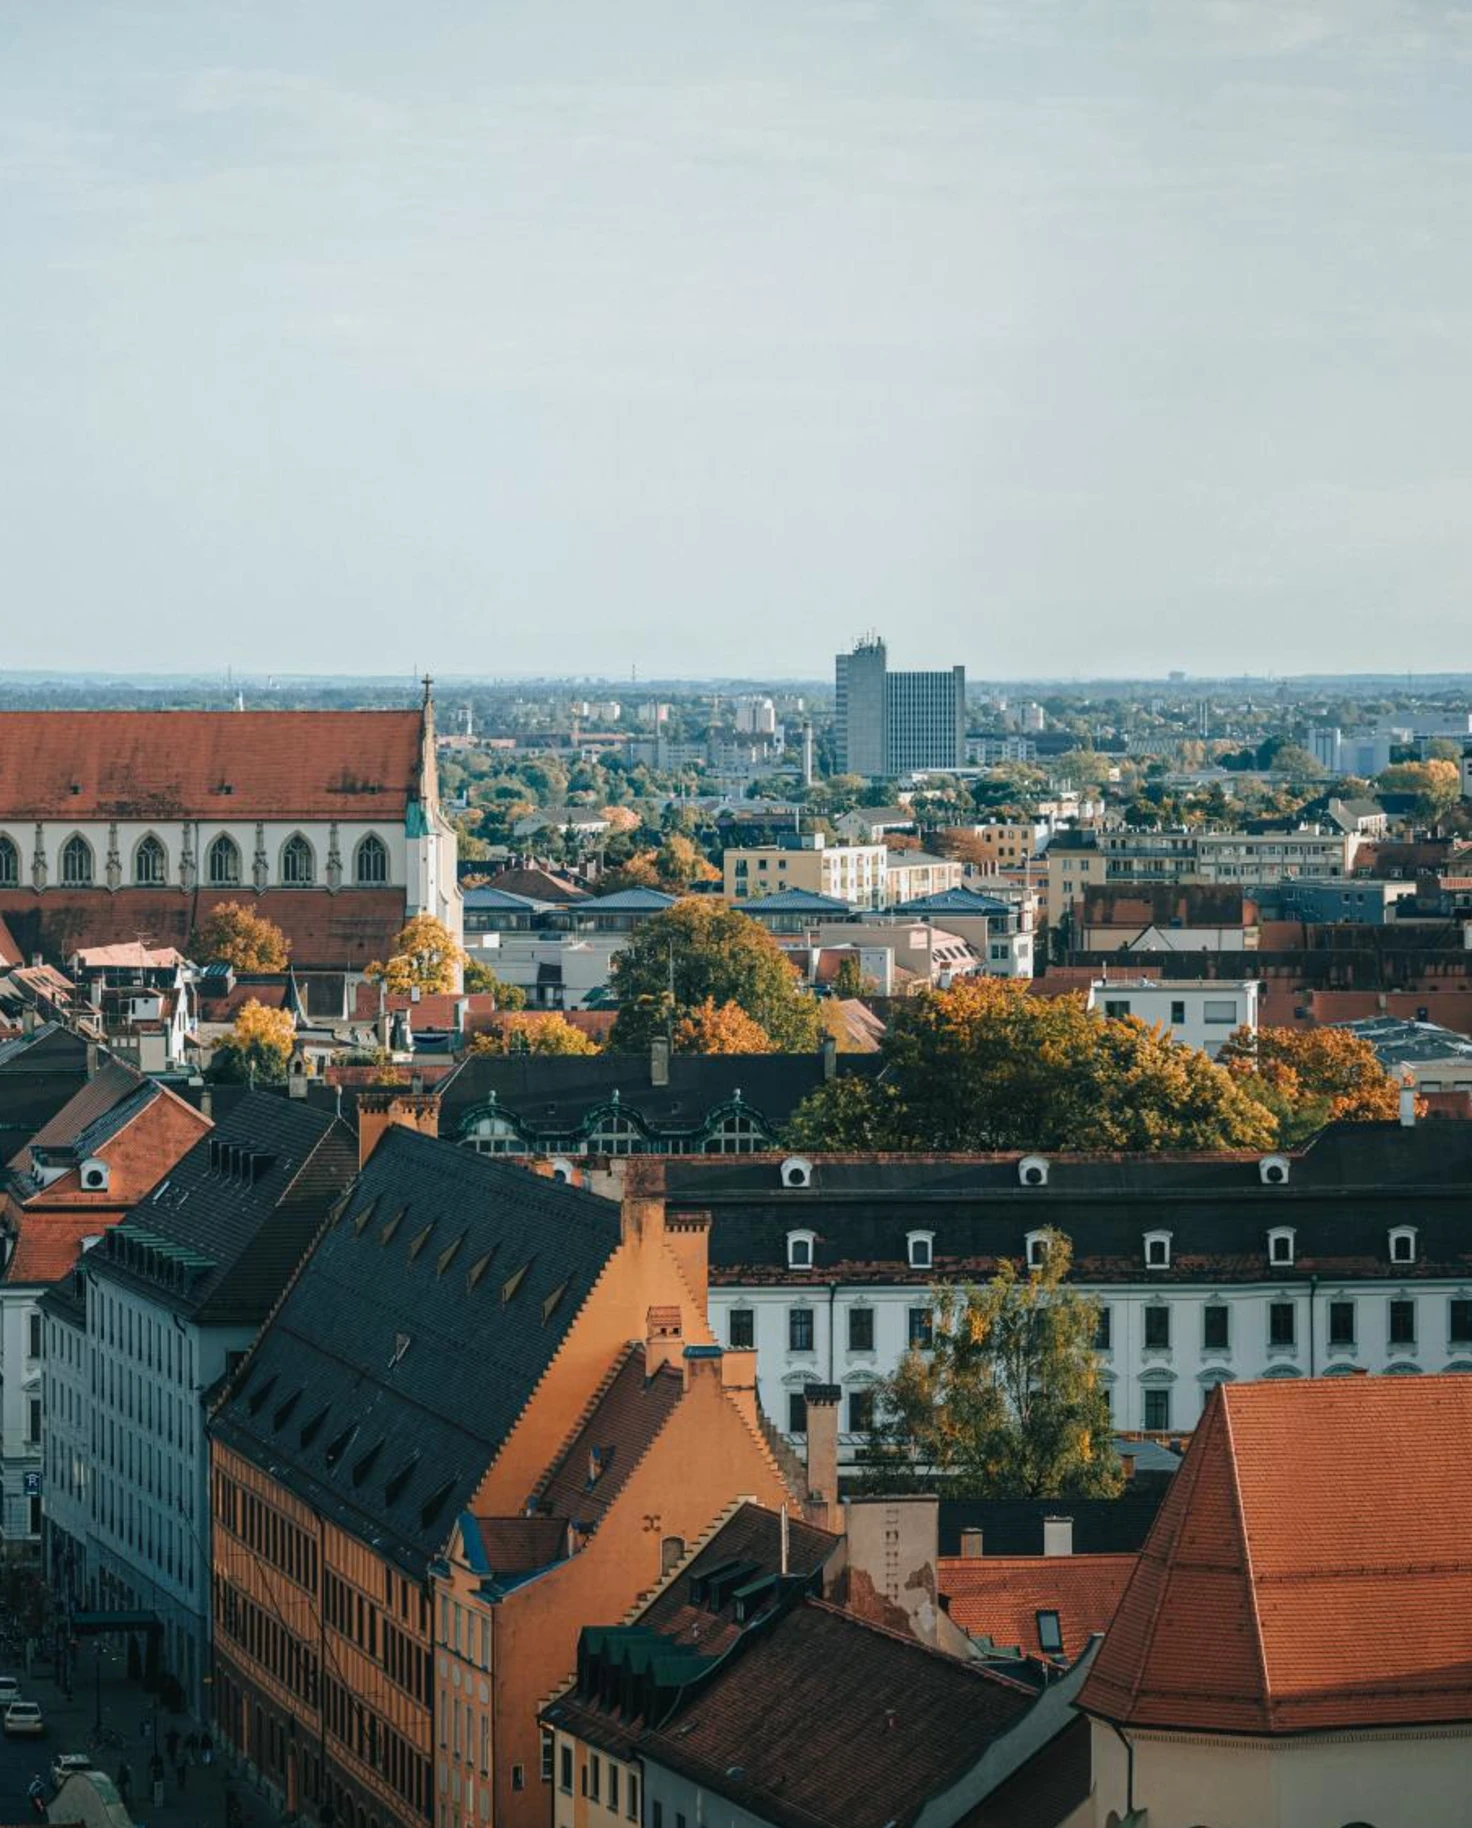 Skyline view of historic buildings and streets in Augsburg, Germany. 